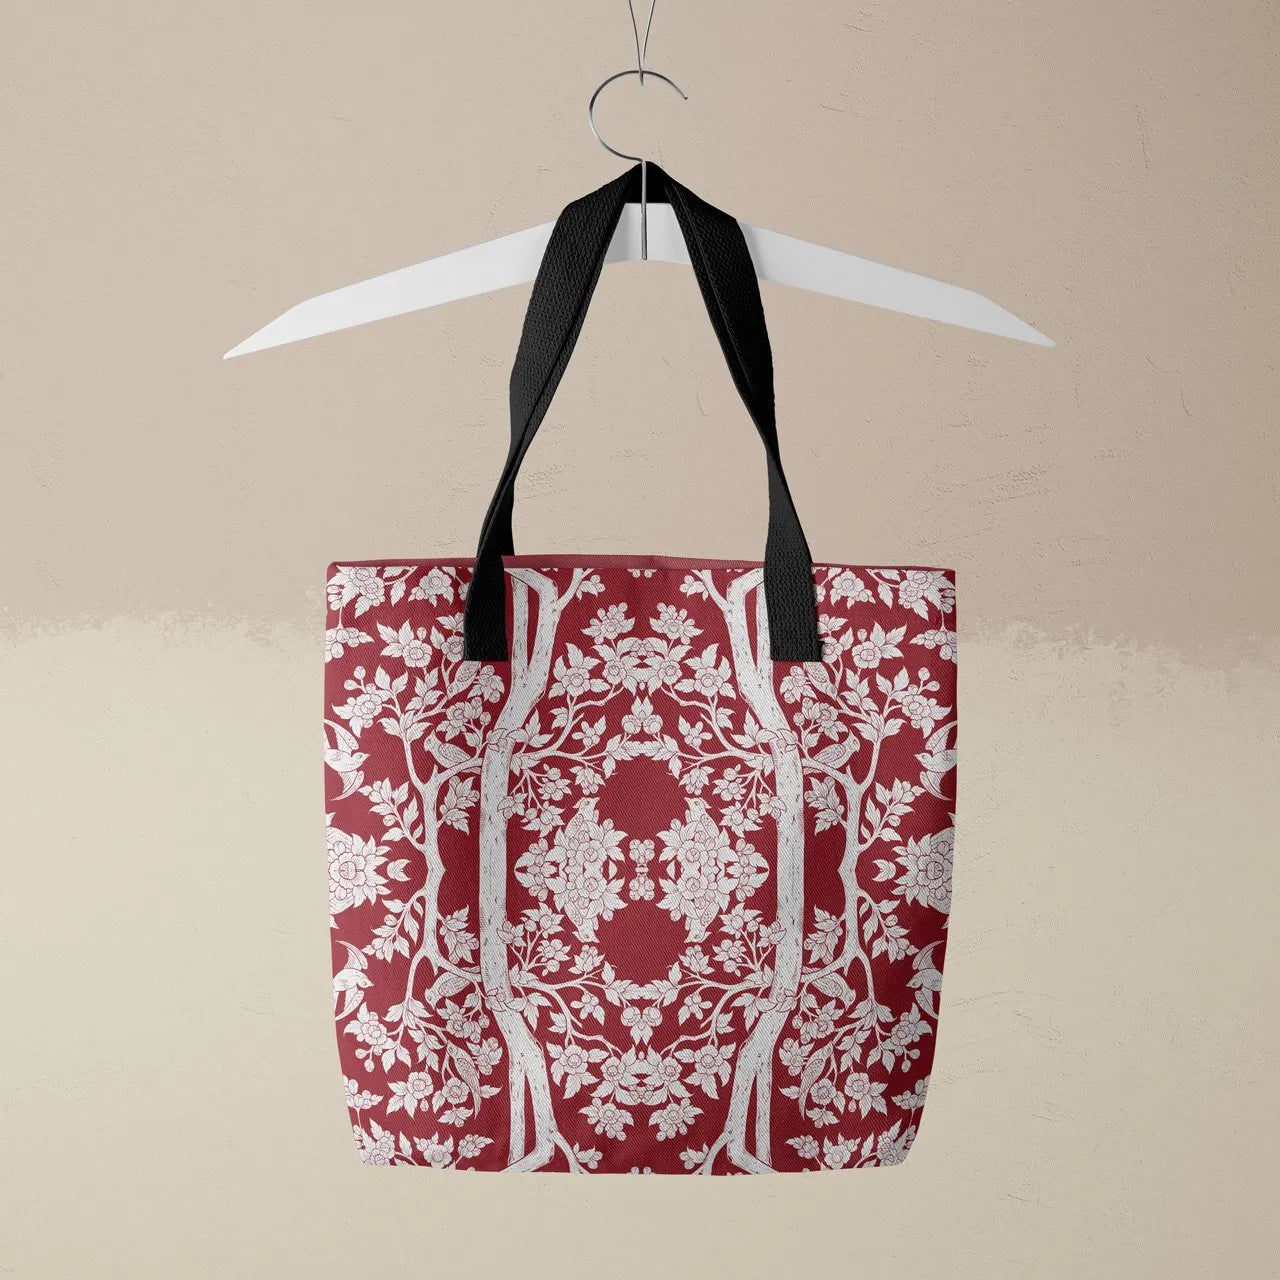 Aviary Tote - Rosella - Heavy Duty Reusable Grocery Bag - Shopping Totes - Aesthetic Art